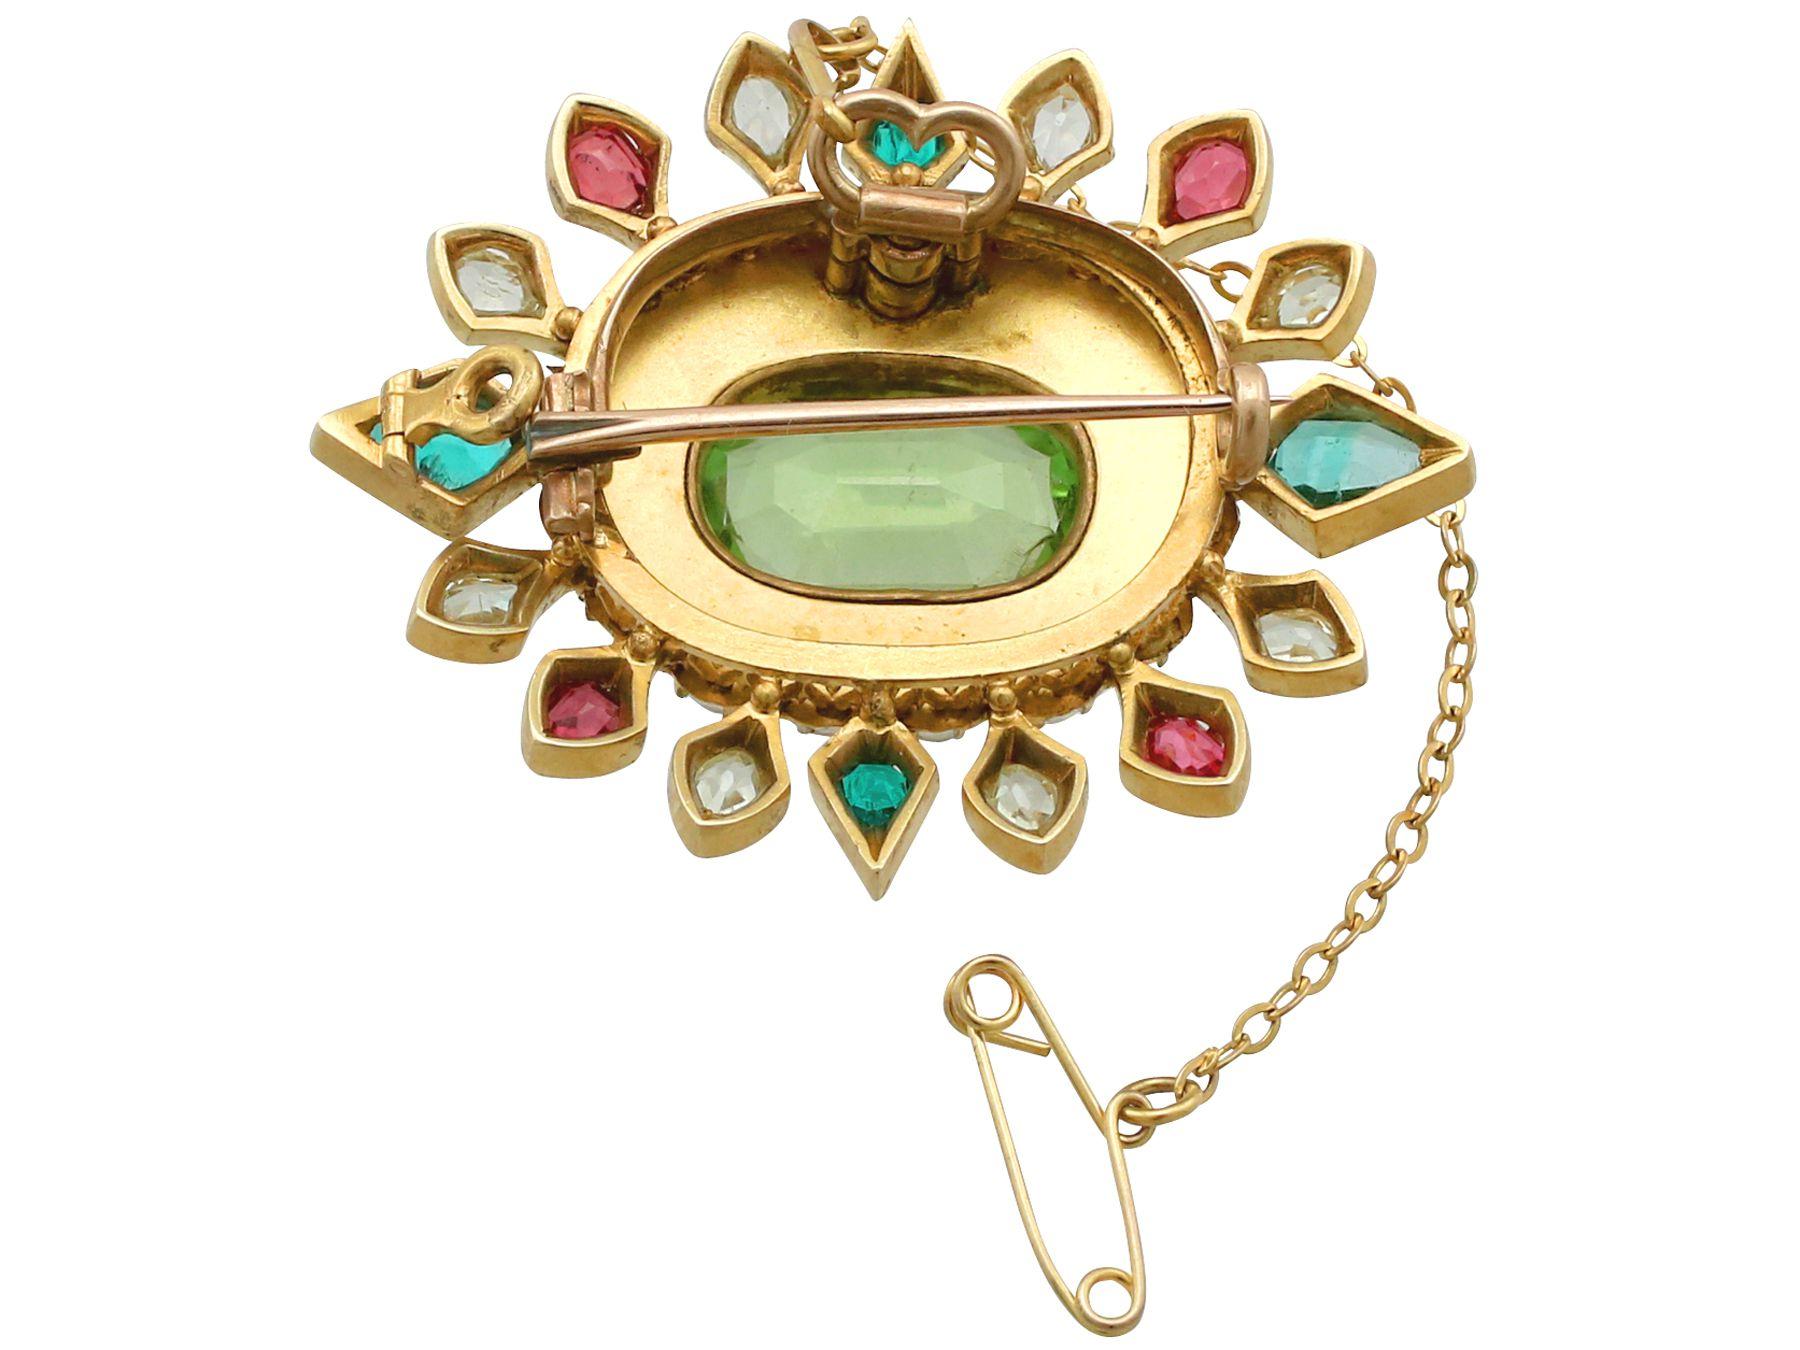 Victorian 4.35 Carat Peridot 2.56 Carat Emerald Sapphire Seed Pearl Gold Brooch In Excellent Condition For Sale In Jesmond, Newcastle Upon Tyne